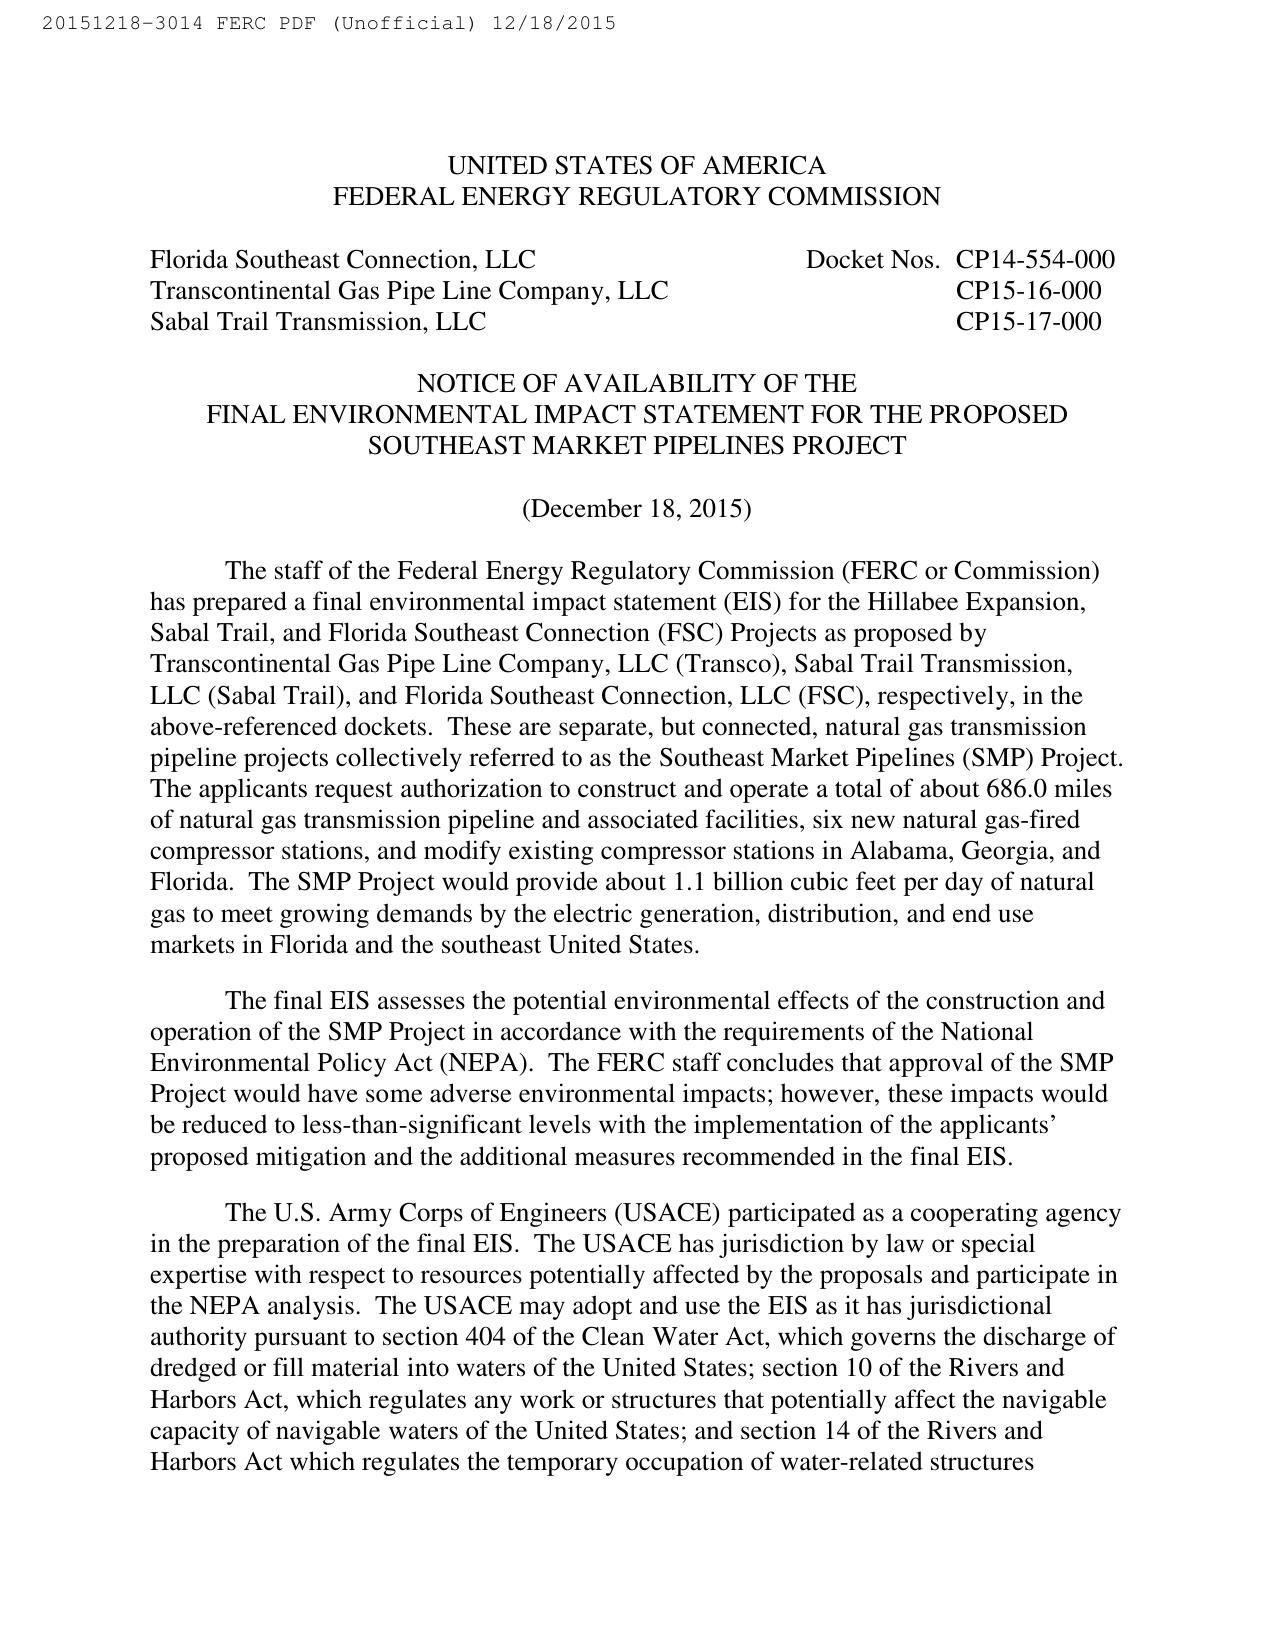 1275x1650 Title, in Sabal Trail FEIS Announcement, by FERC, for SpectraBusters.org, 18 December 2015